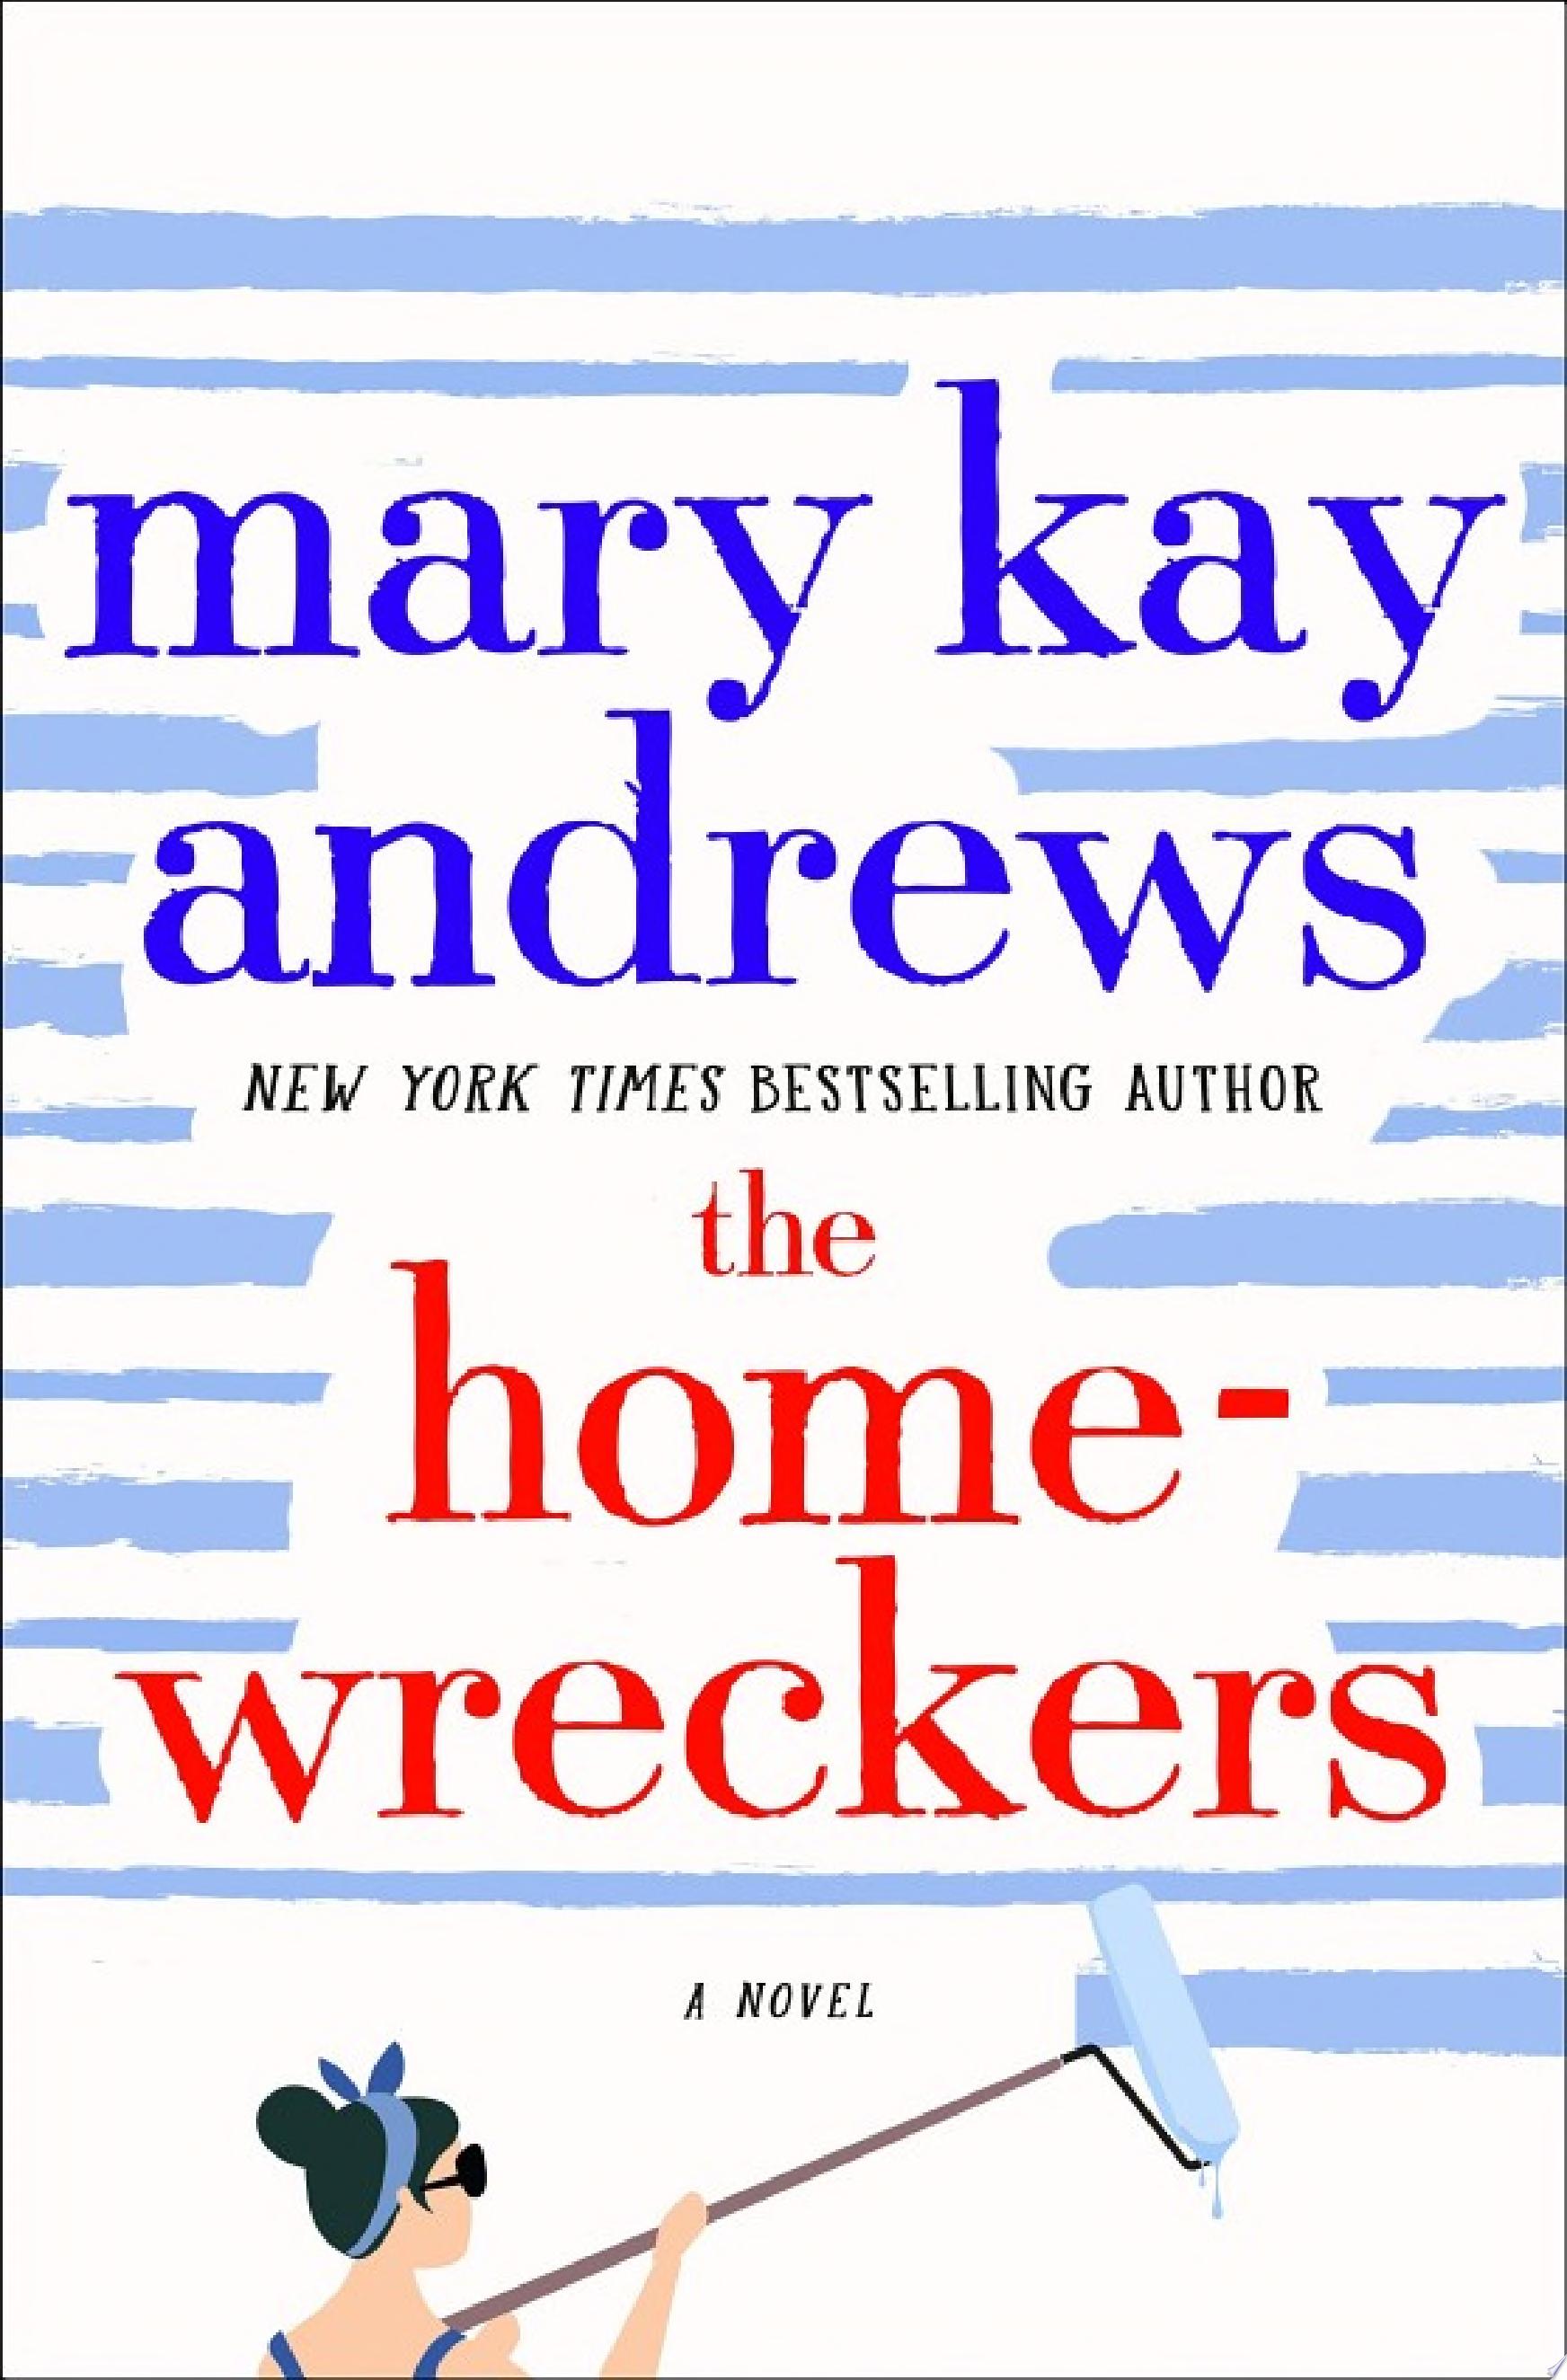 Image for "The Homewreckers"